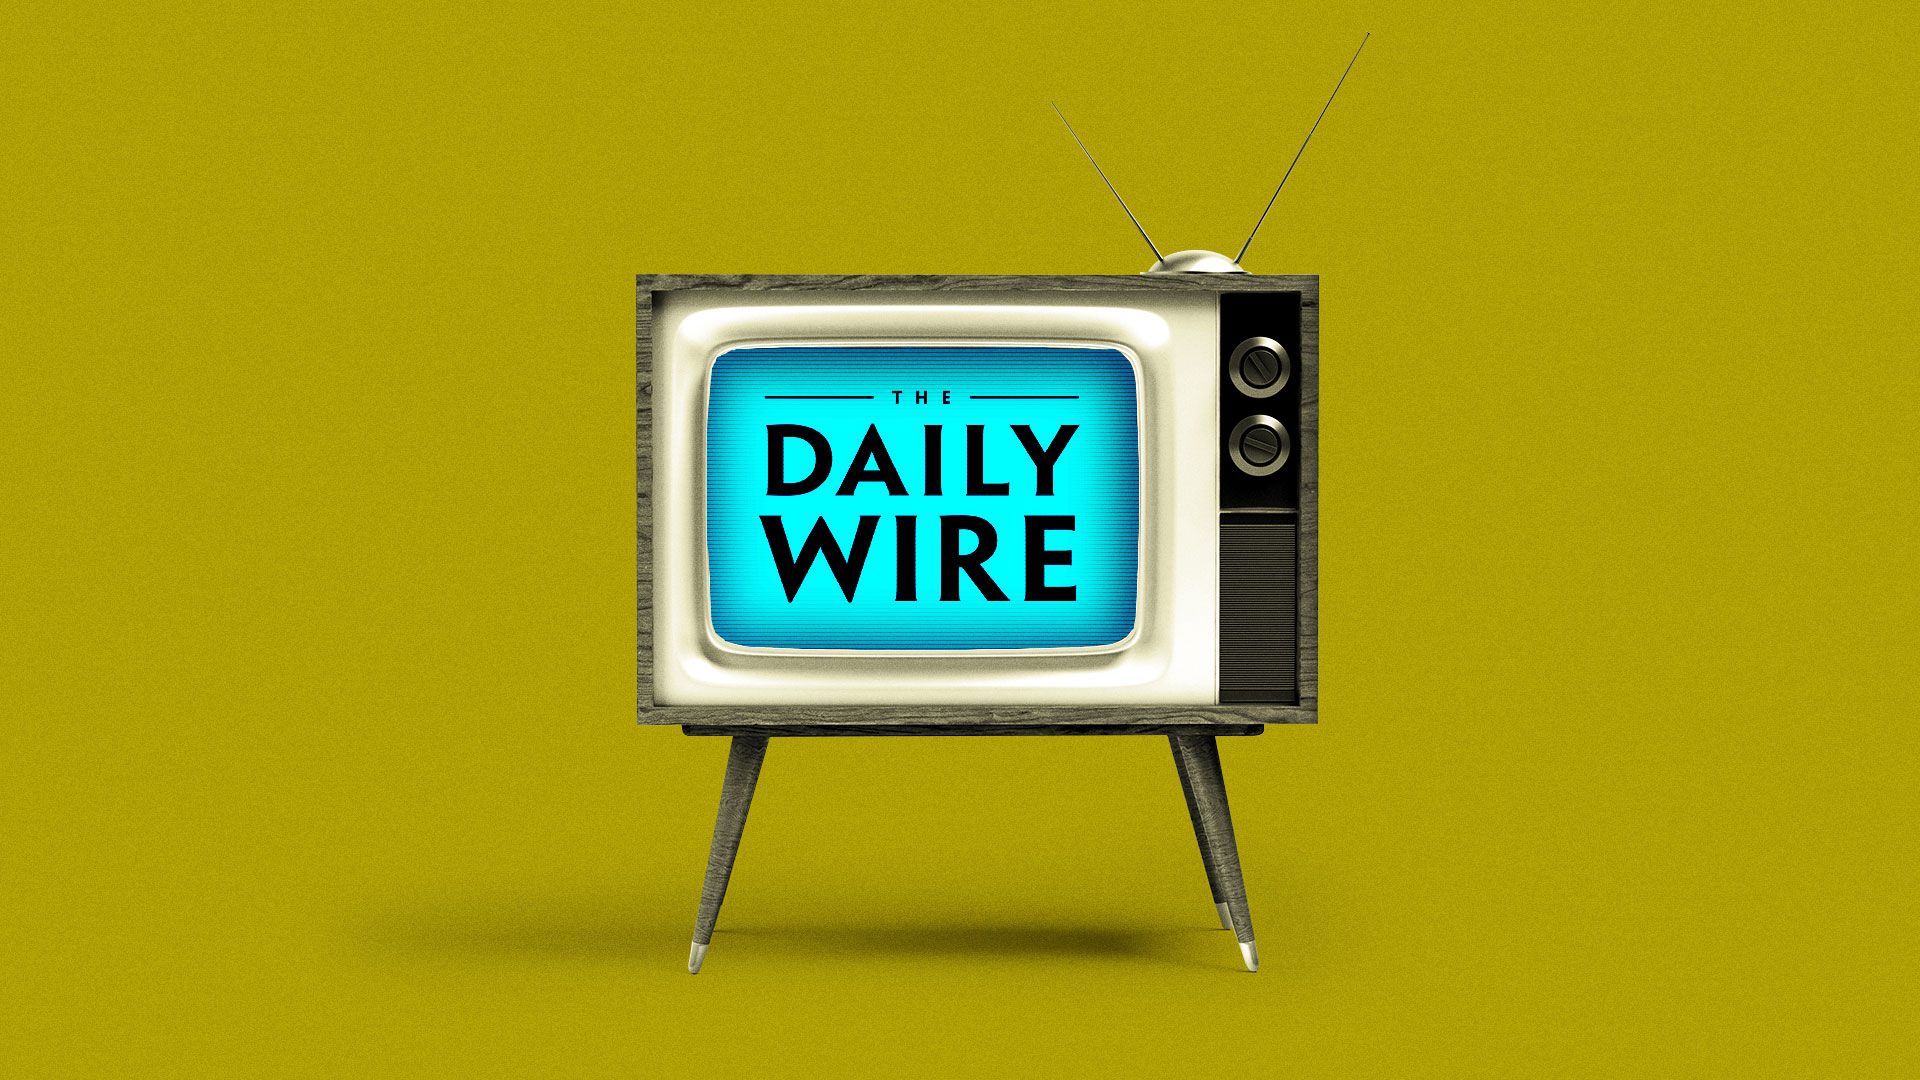 Illustration of television with The Daily Wire logo on the screen